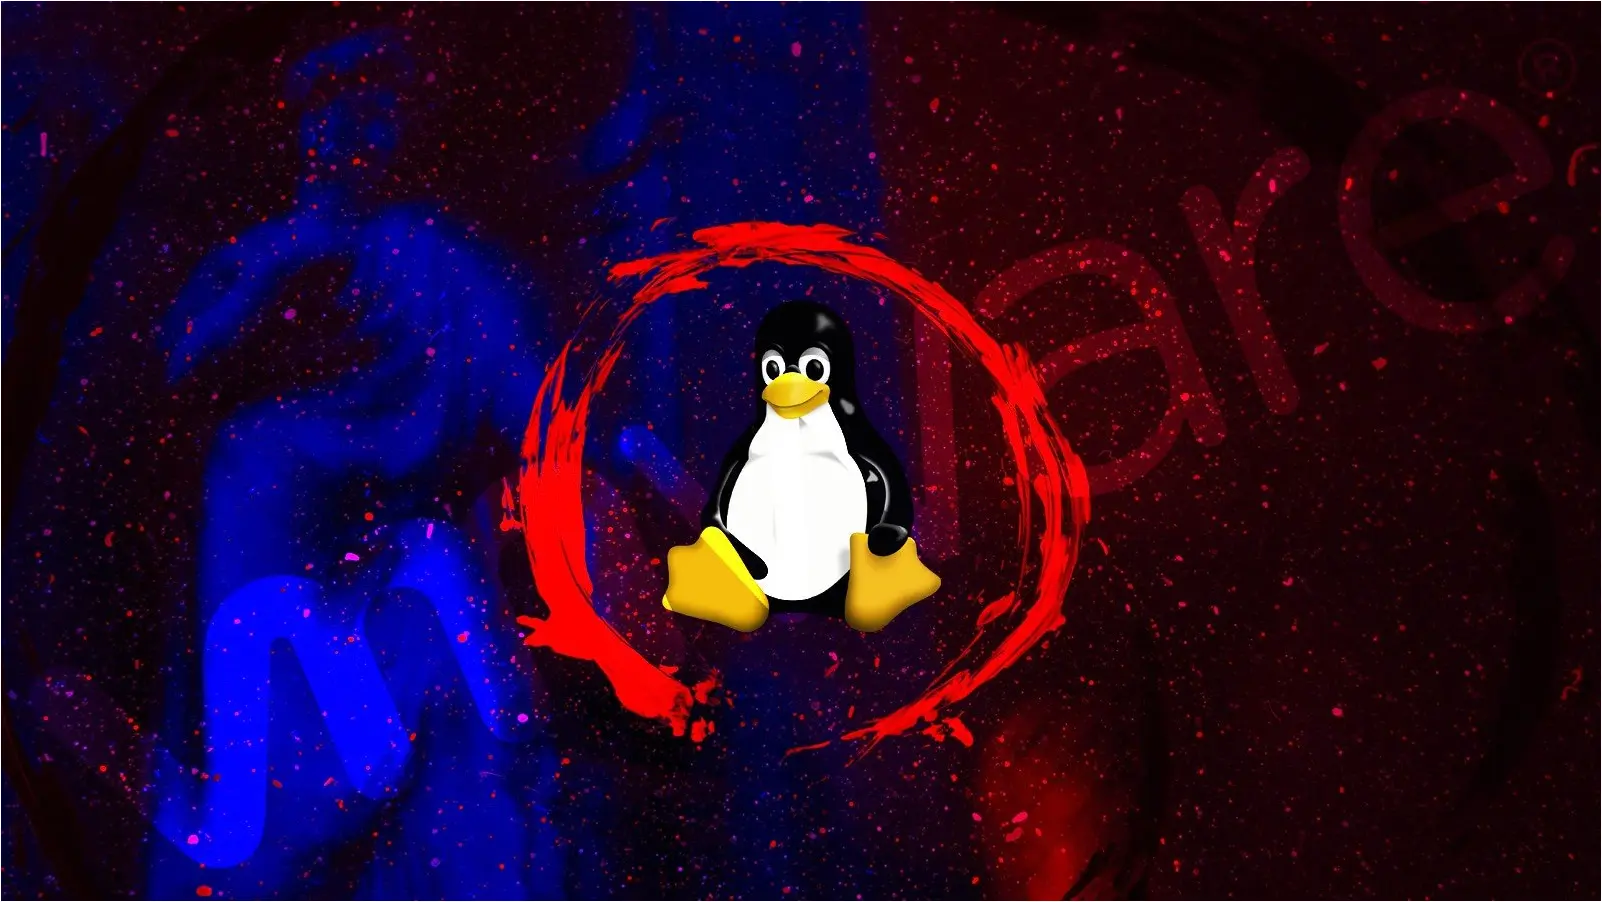 Vmware and Tux